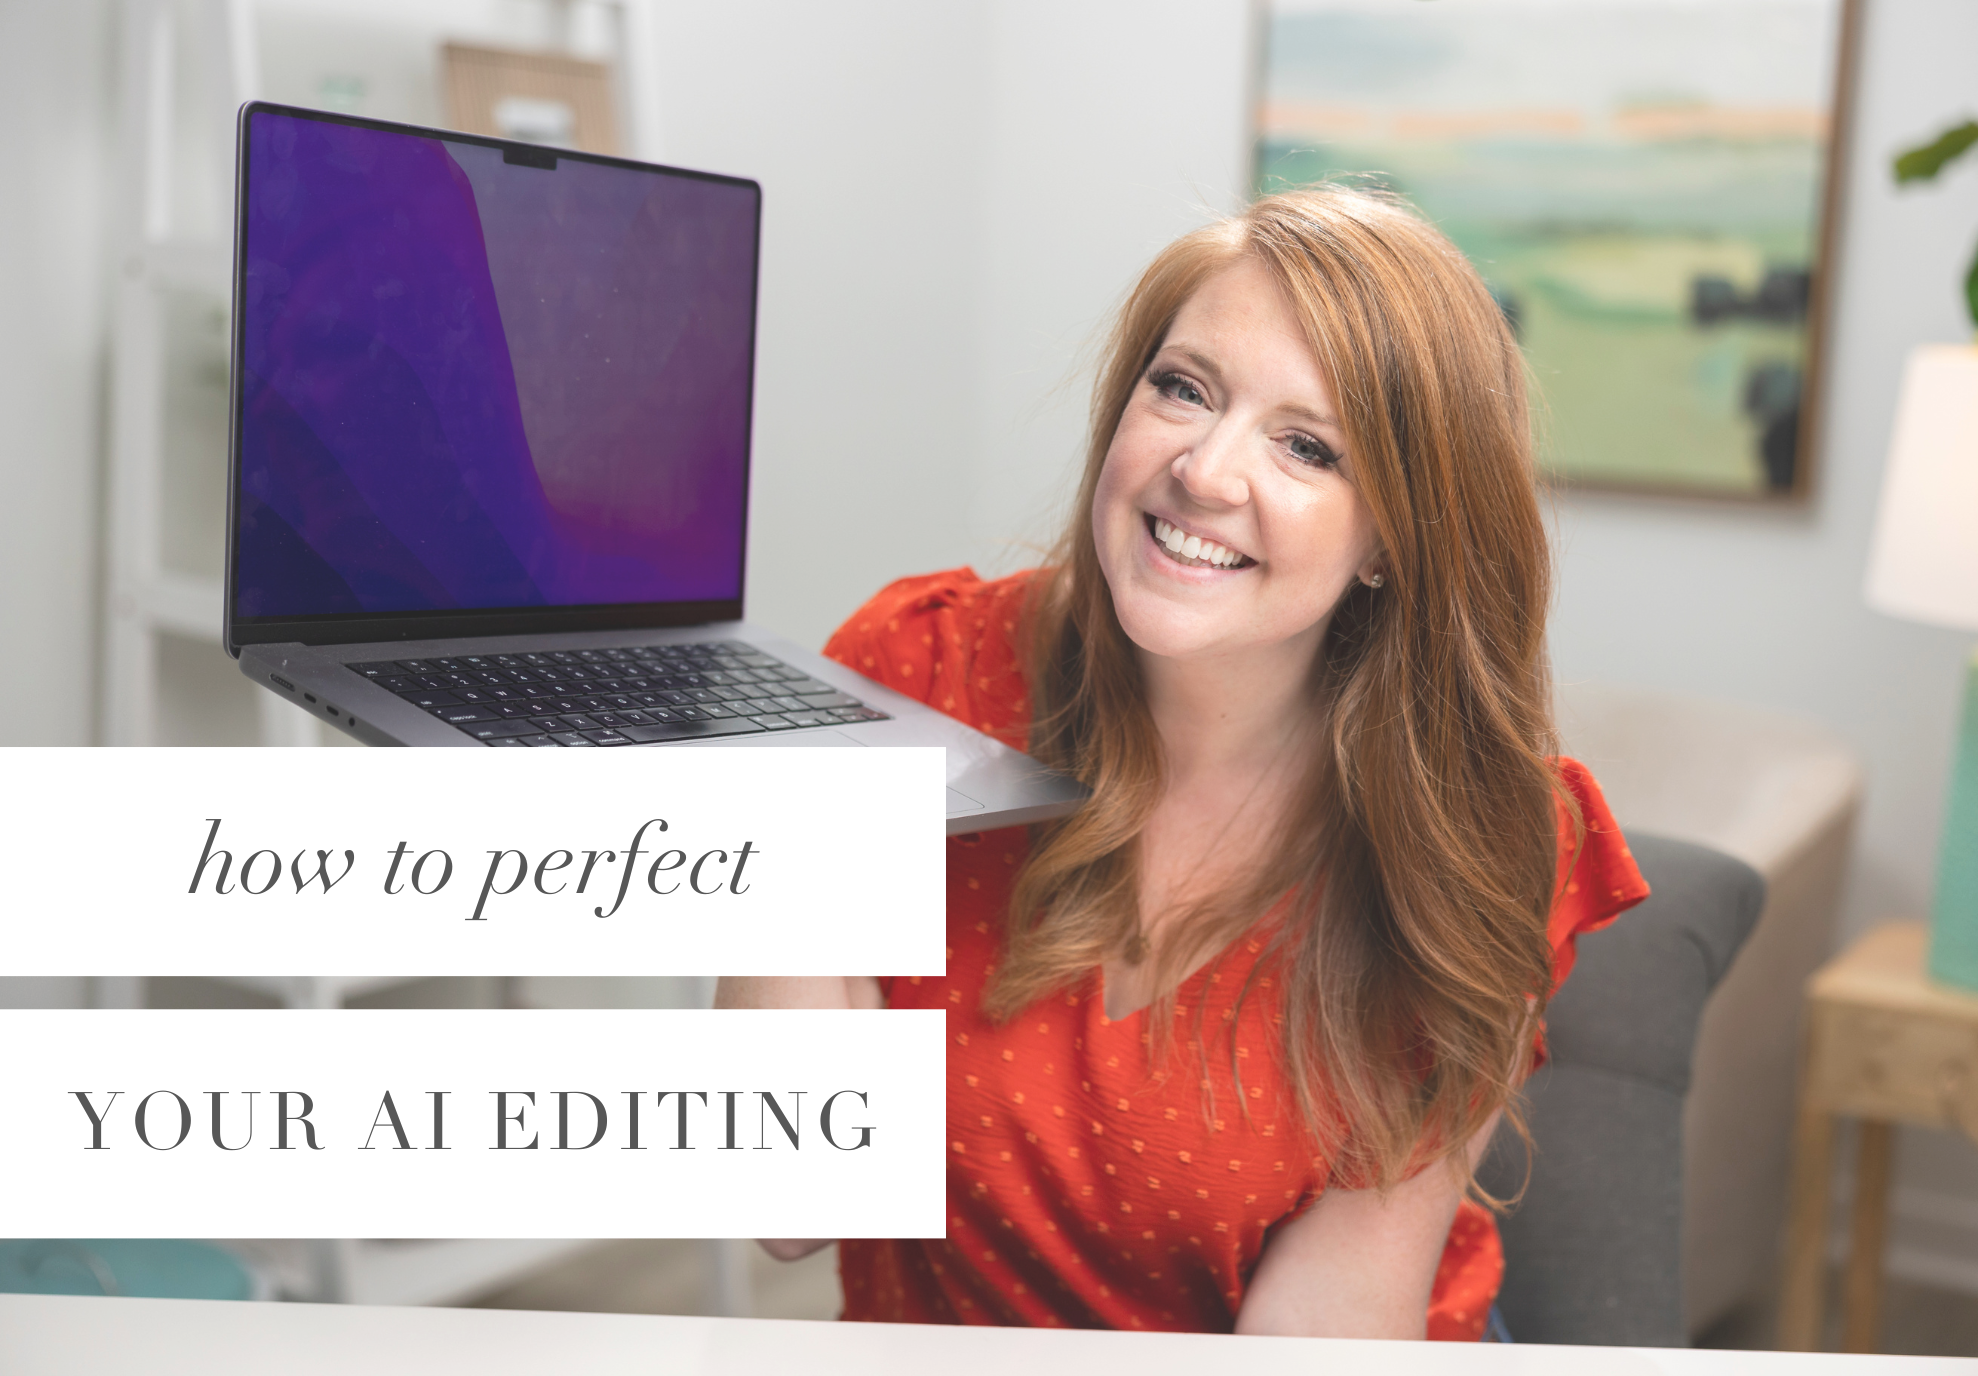 HOW TO PERFECT AI EDITING